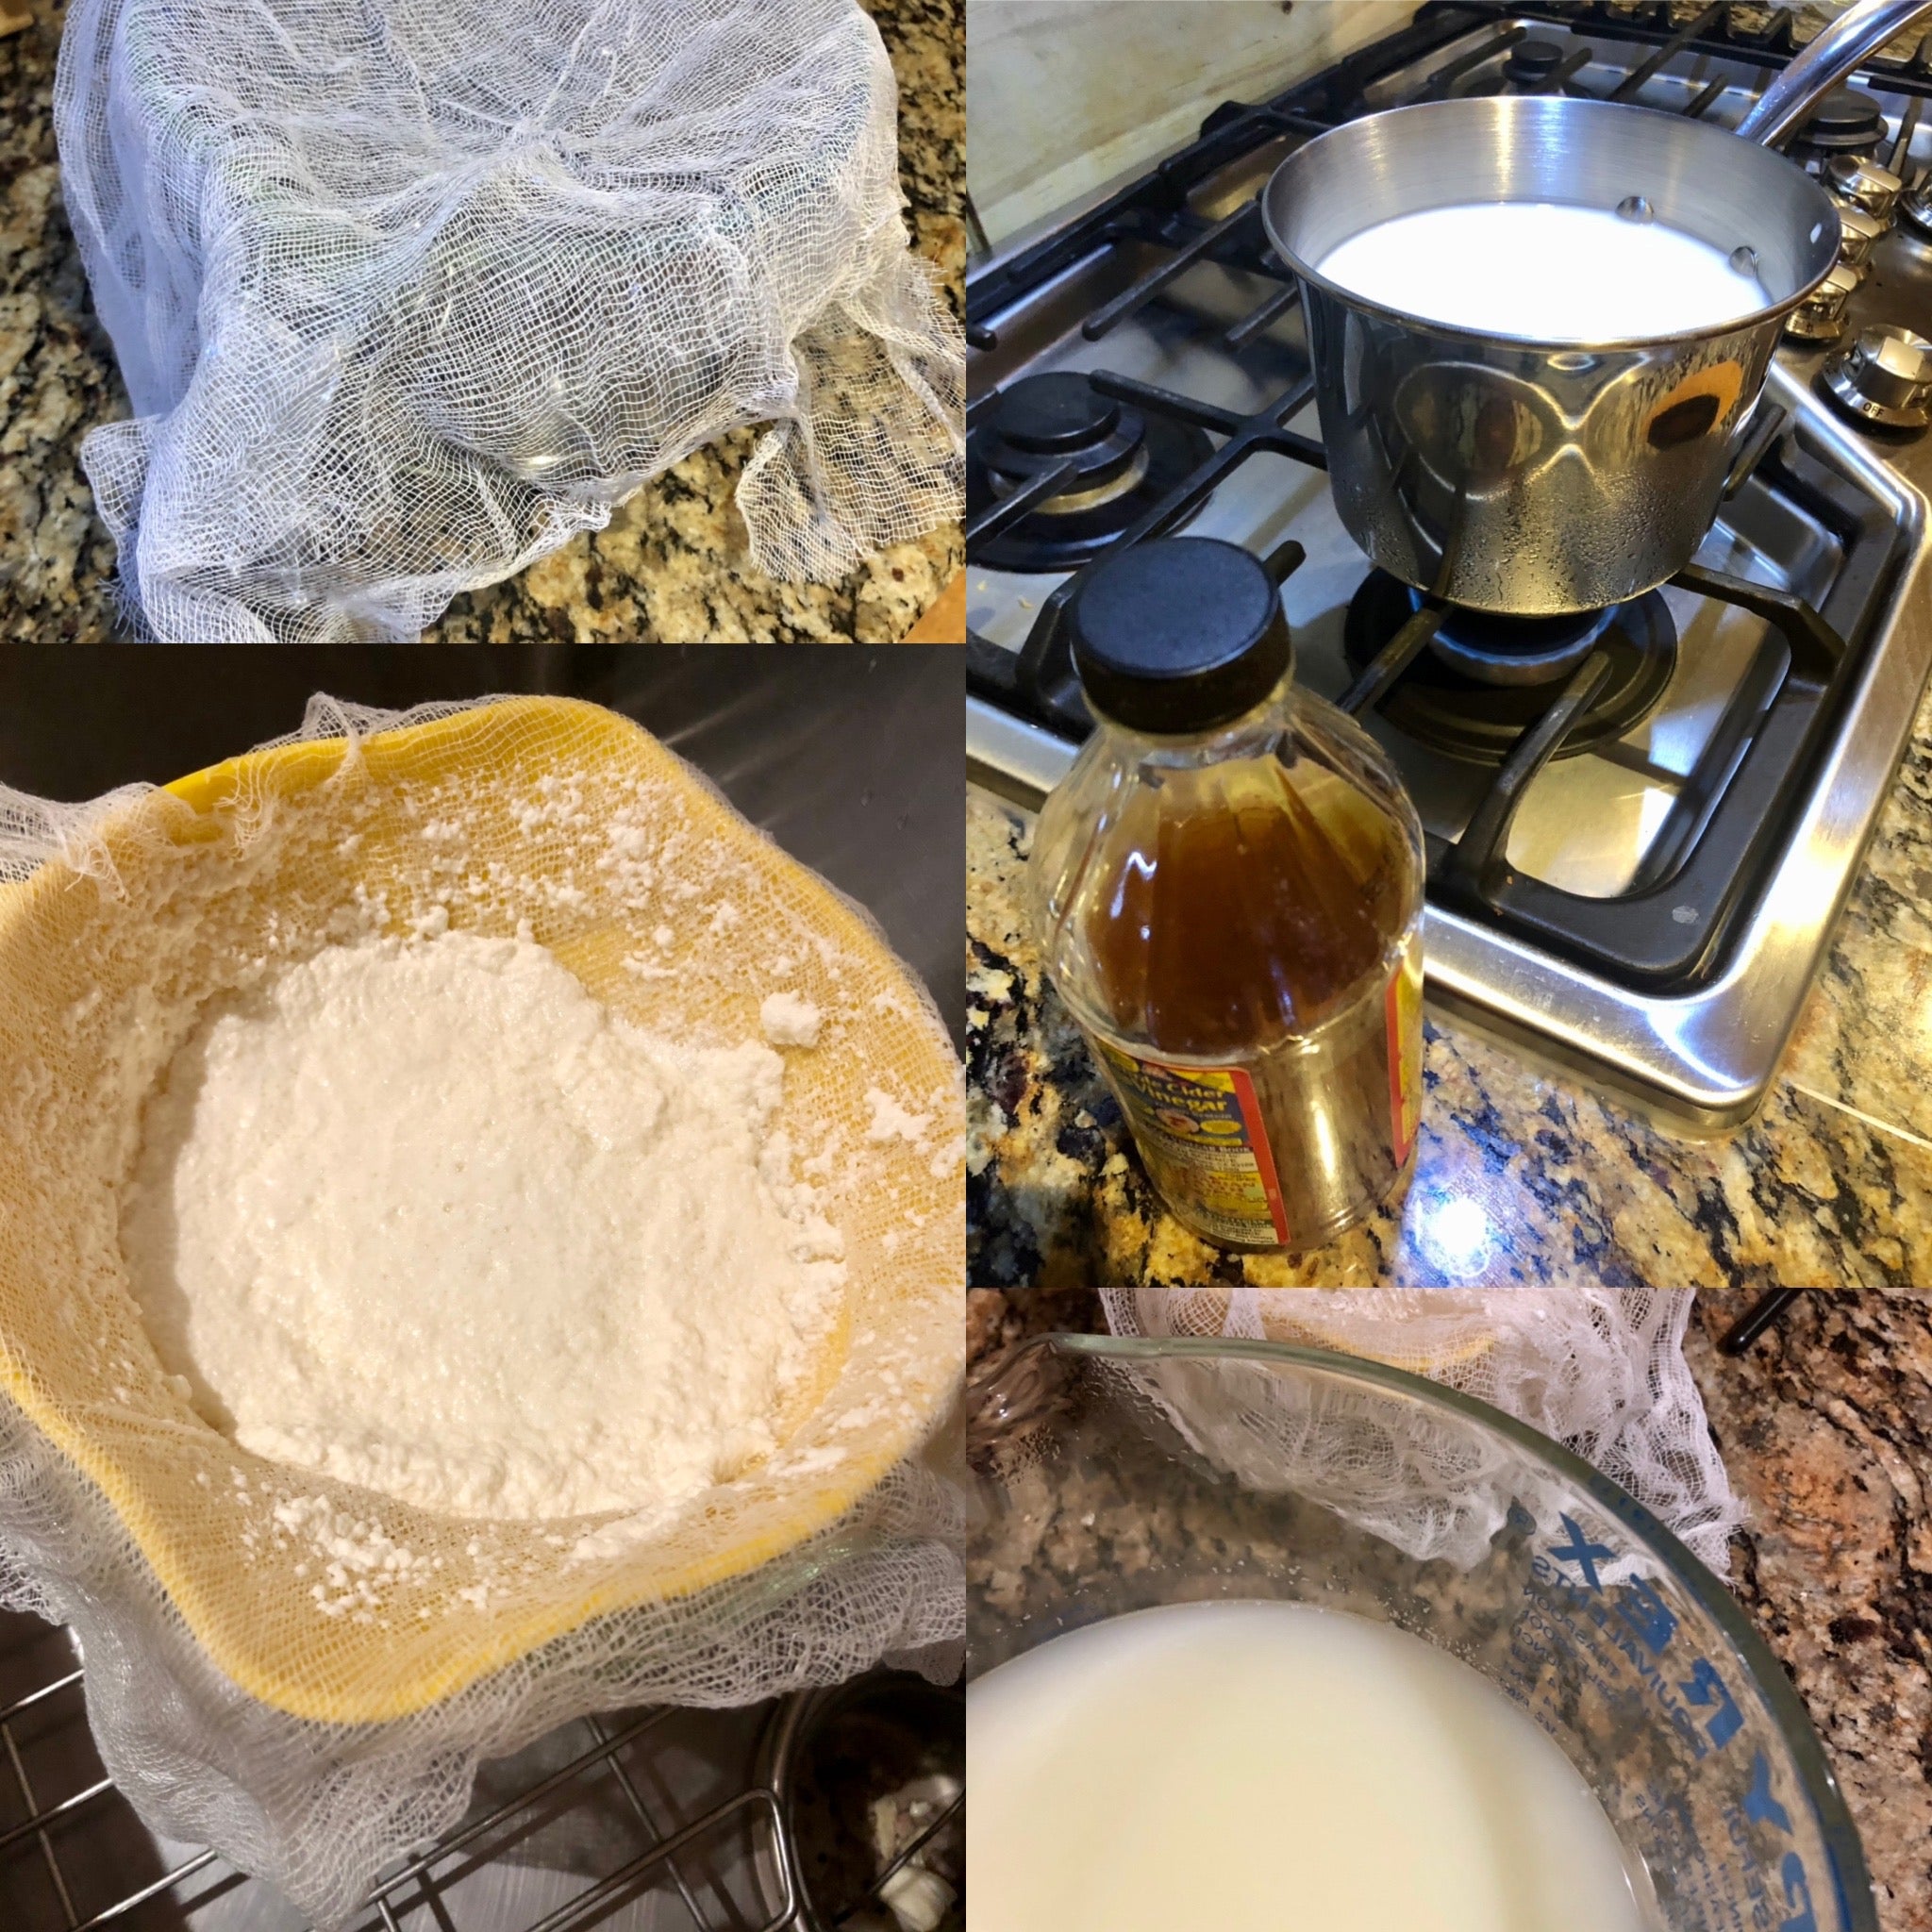 The Art of Easy Cheesemaking: Curds and Whey